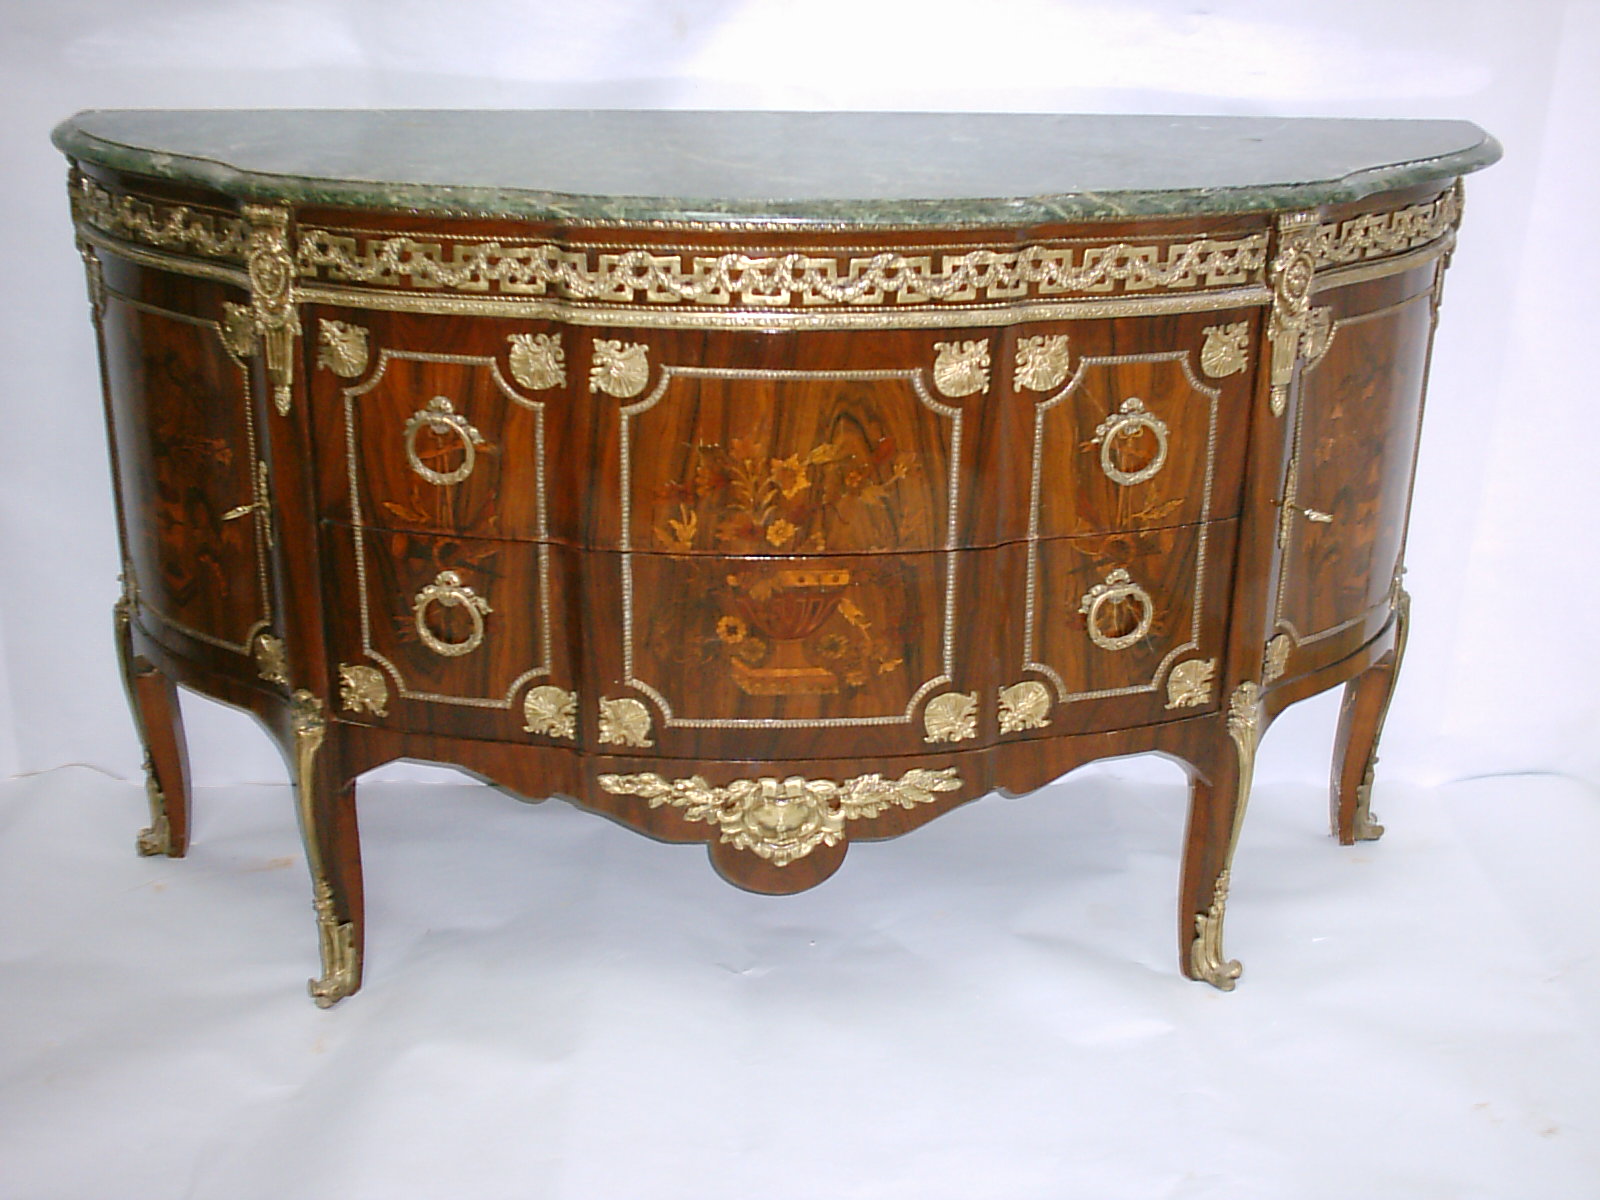 furniture antique and reproduction furniture: a great variety of